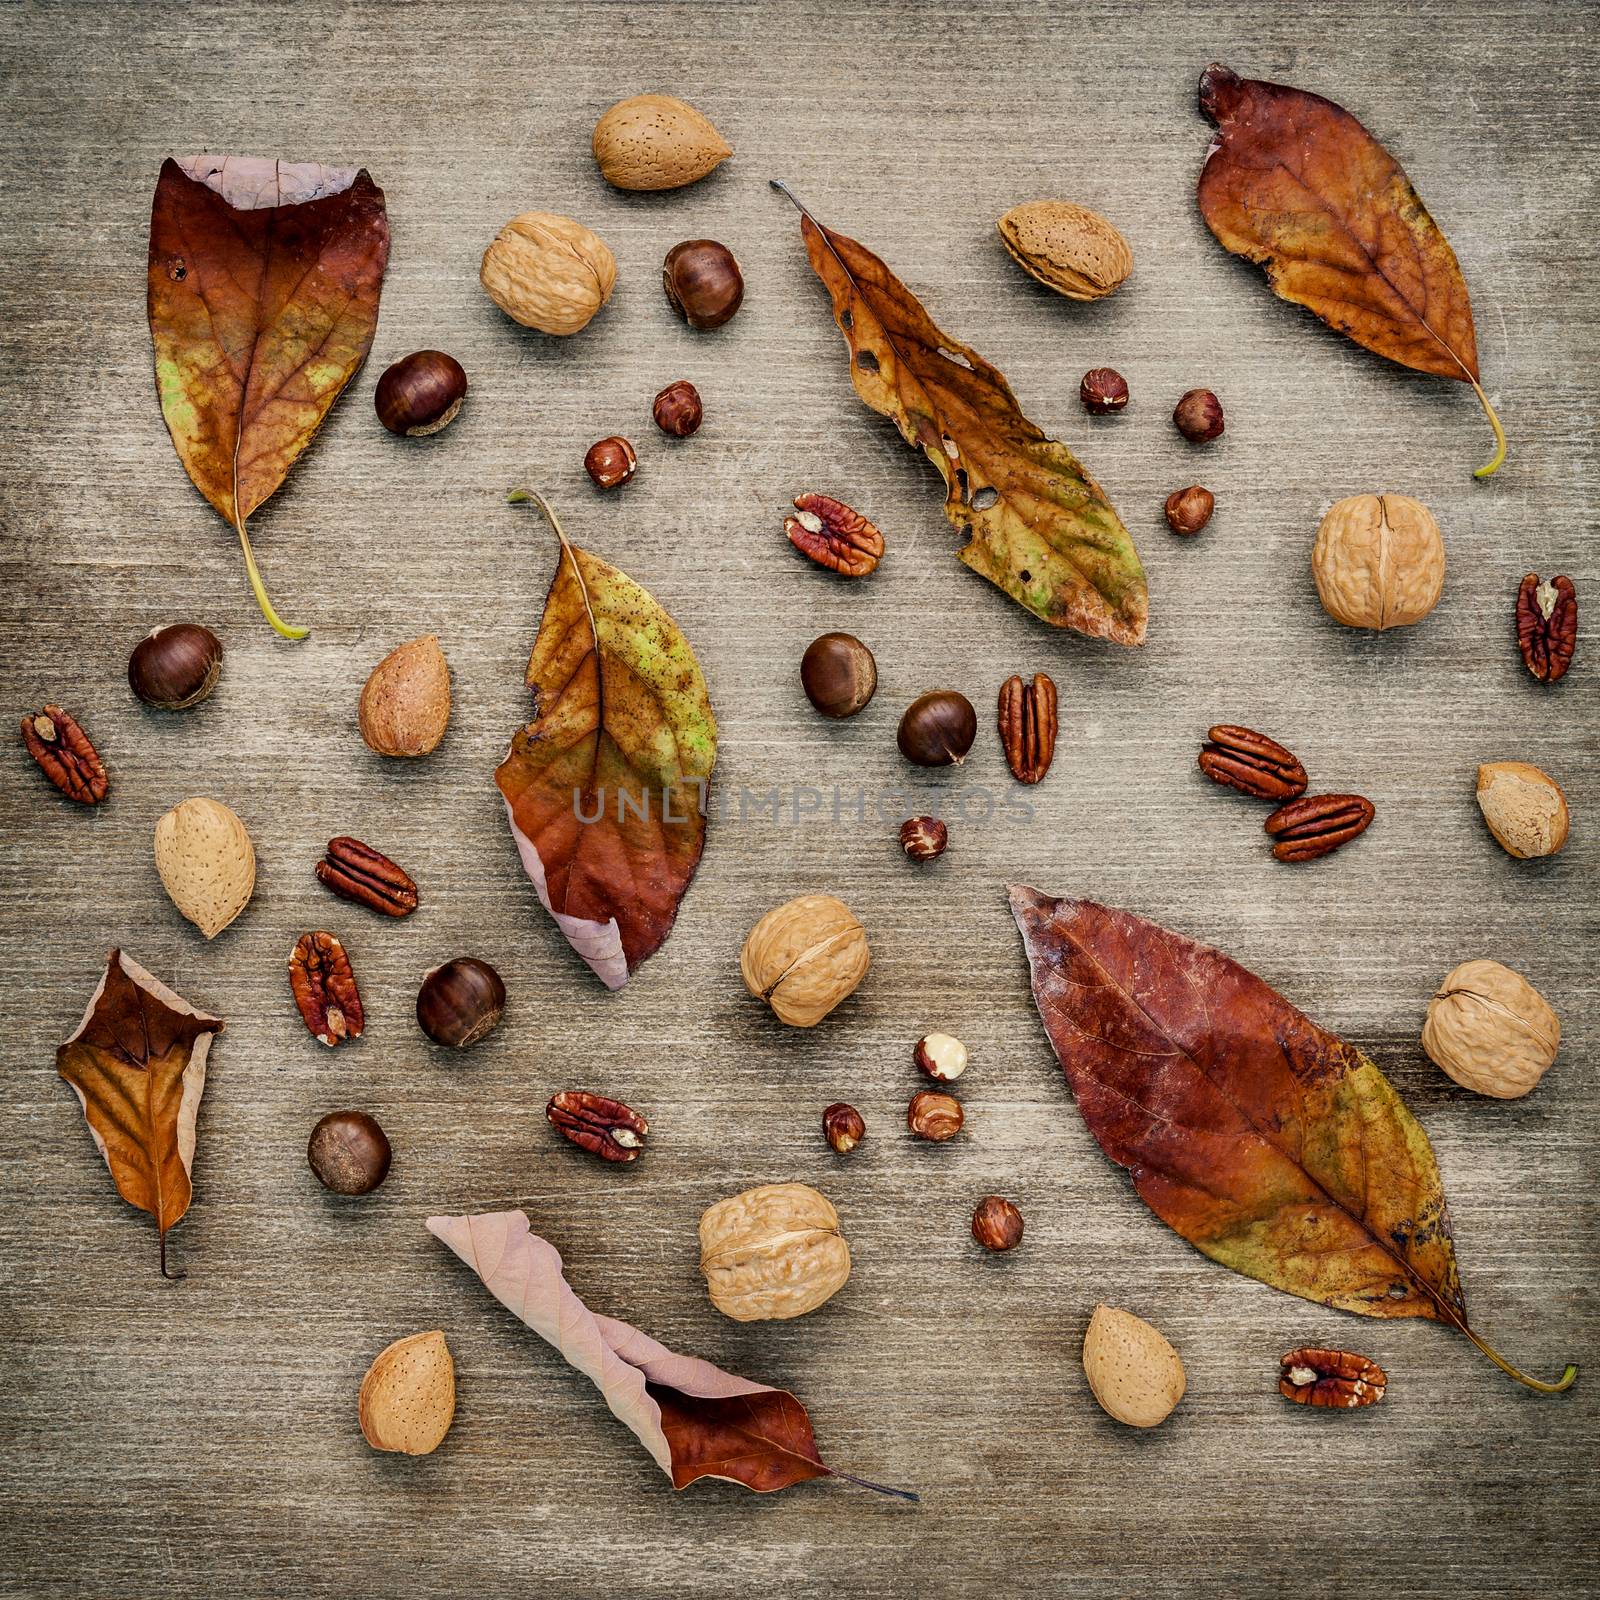 Different kinds of nuts walnuts kernels ,hazelnuts, almond kernels and pecan with dried orange leaves set up on rustic wooden background.